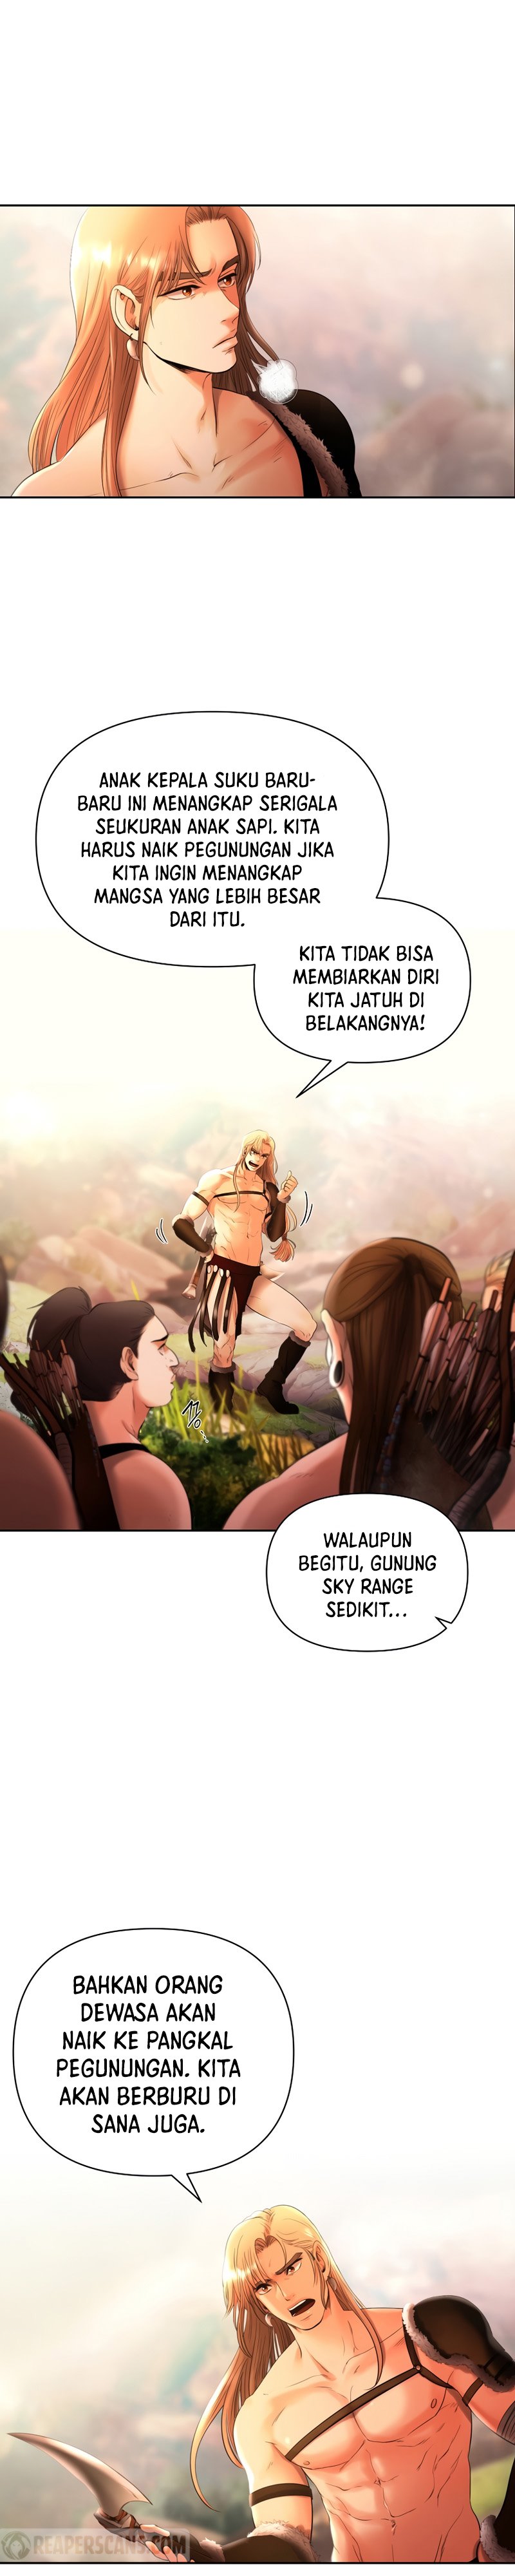 Barbarian Quest Chapter 01